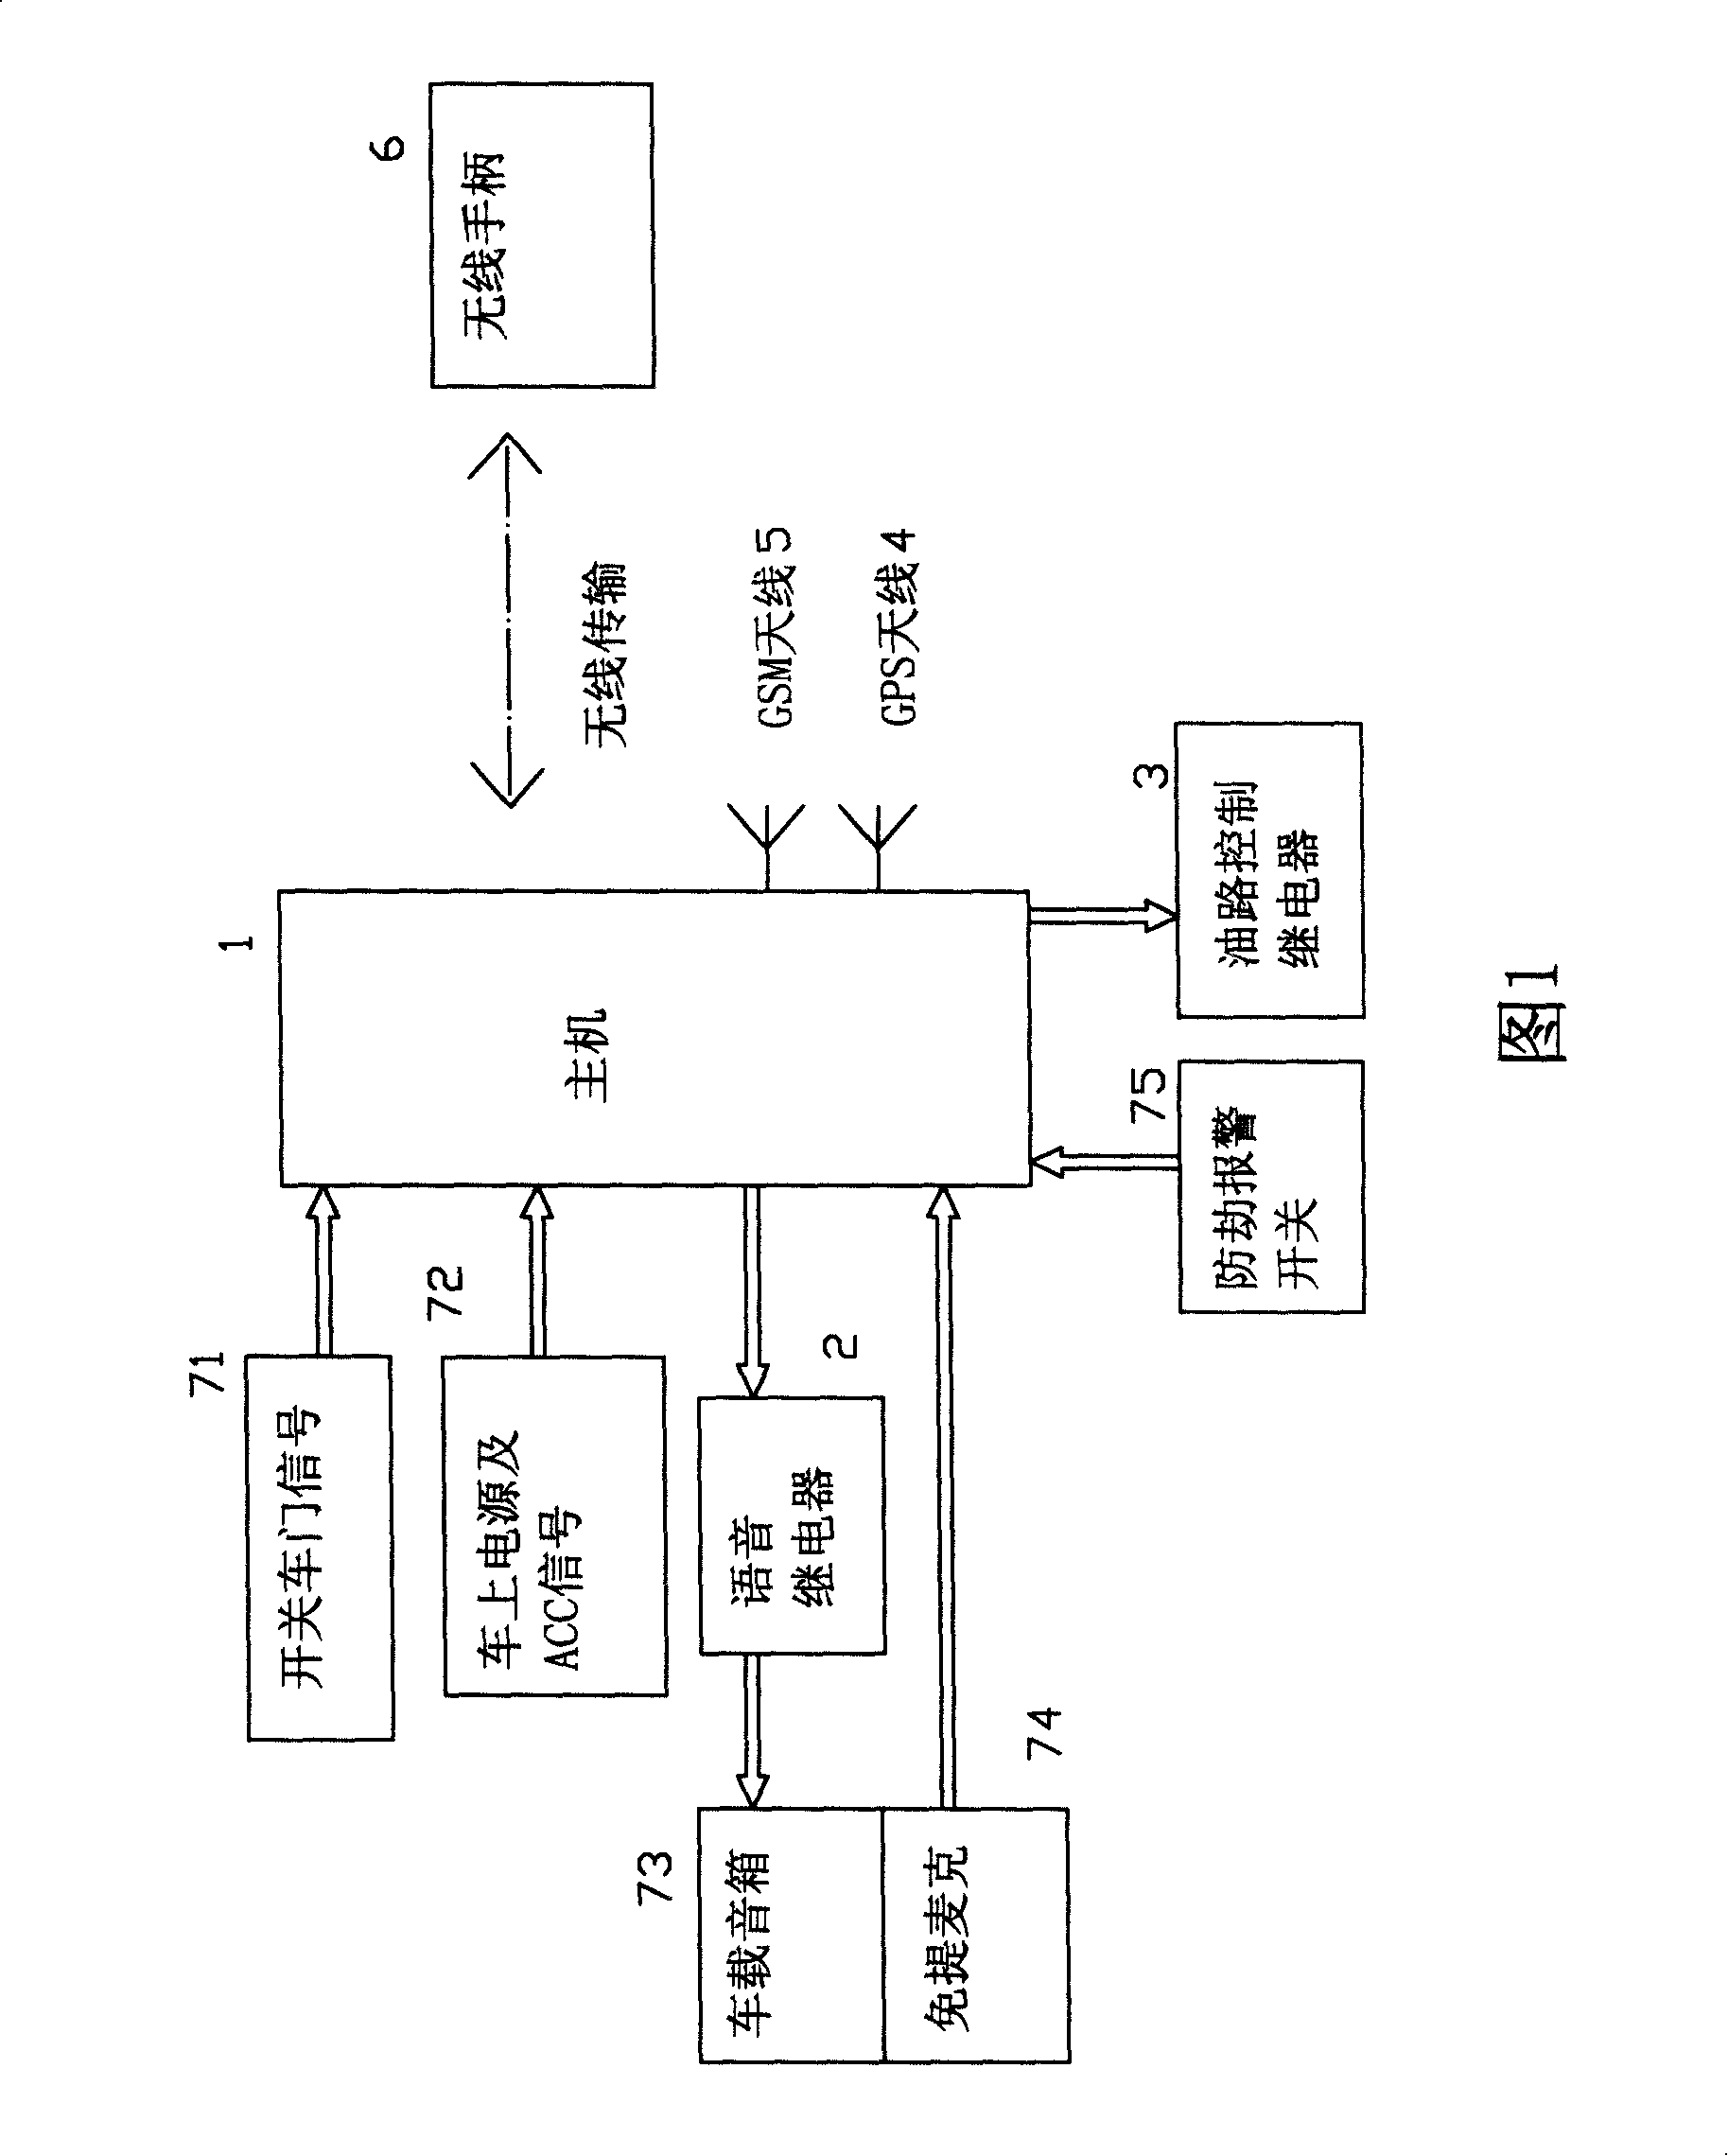 Vehicle mounted terminal integrated with guidance and vocation application